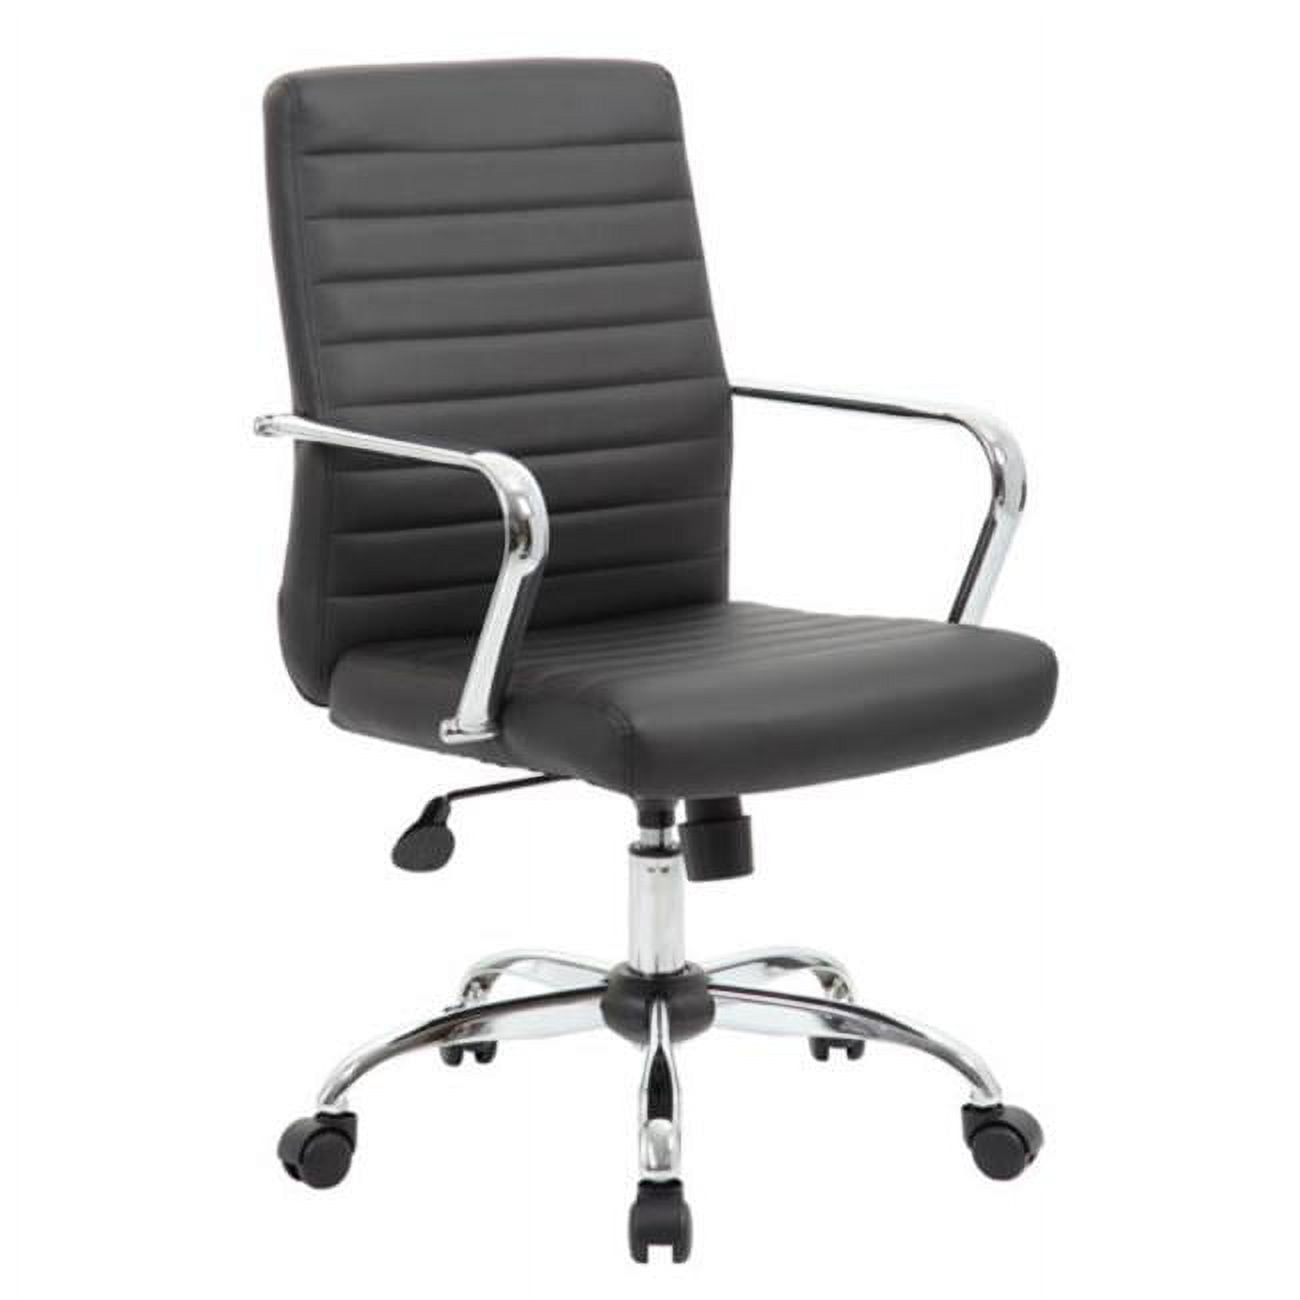 Boss Retro Task Chair With Chrome Fixed Arms, Black